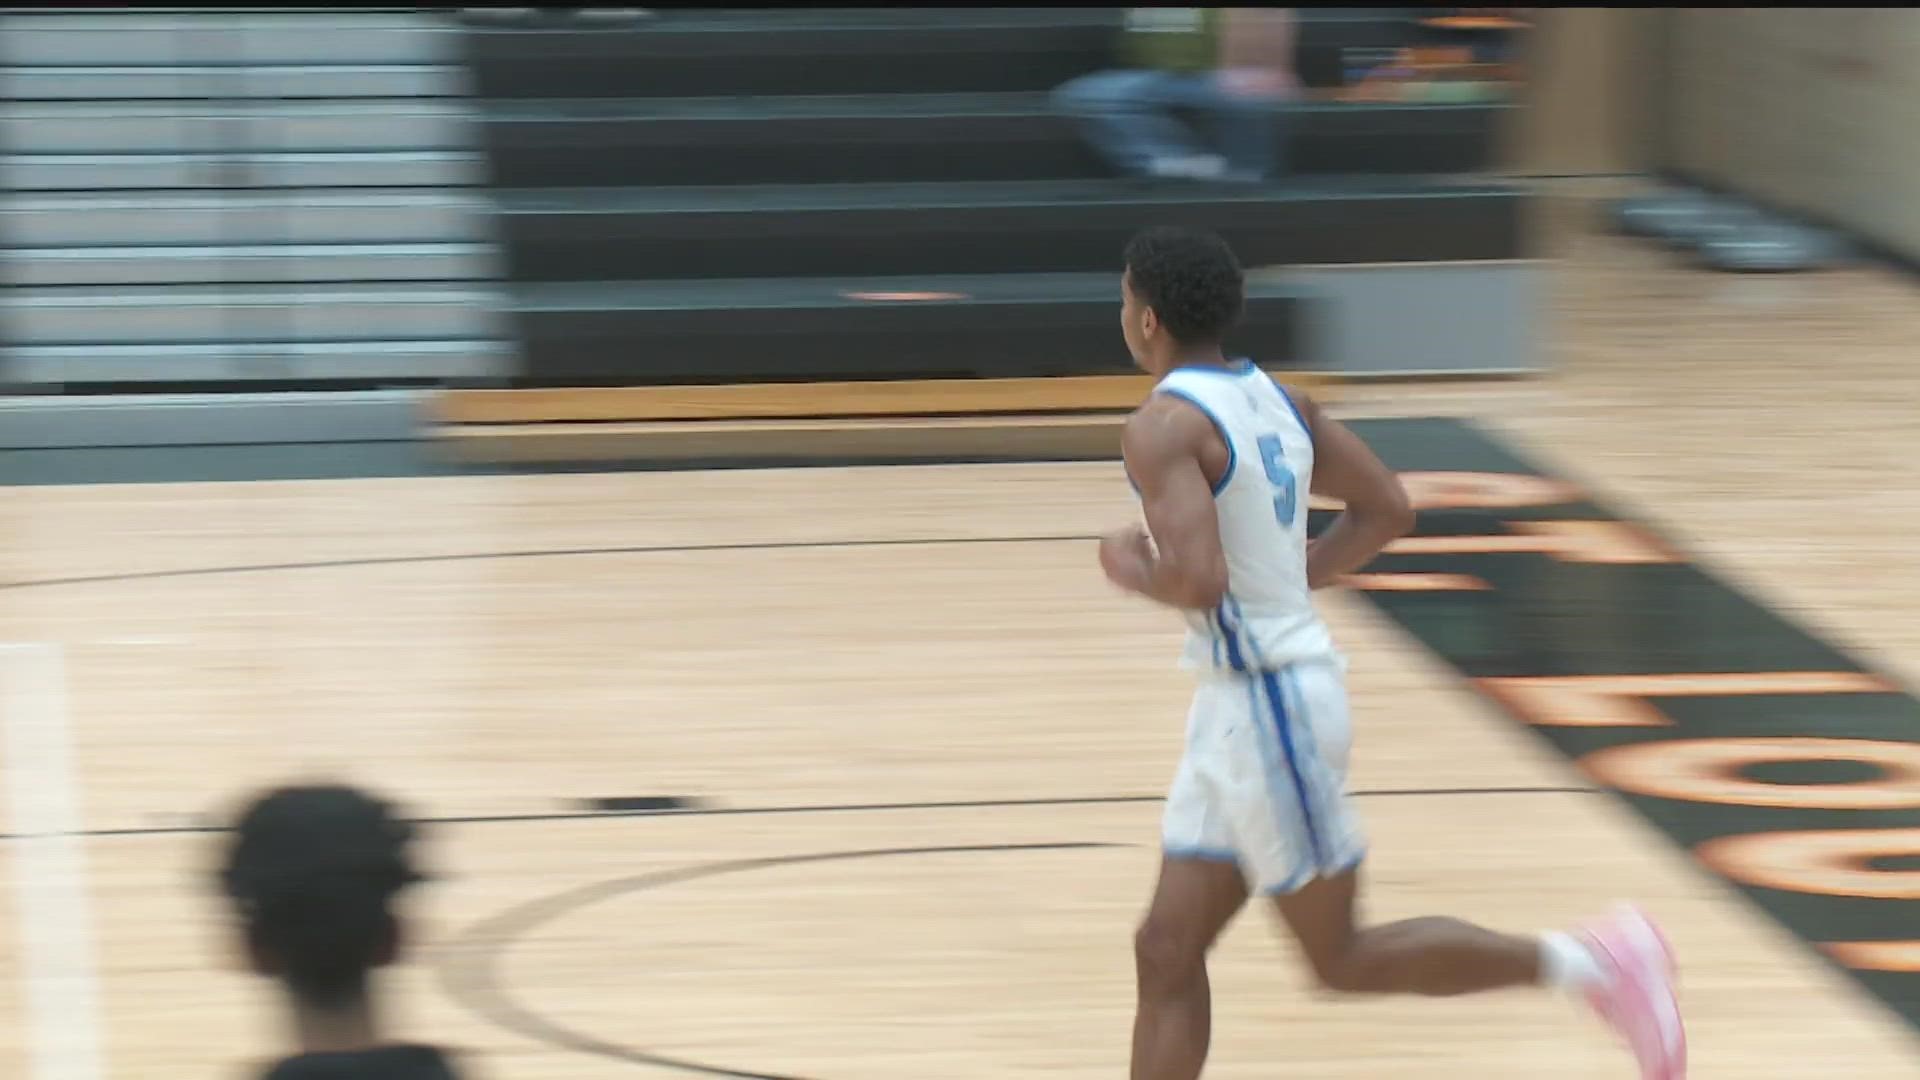 Bloomington Jefferson defeated St. Louis Park 74-41, while Benilde-St. Margaret's beat Orono 78-59 in boys basketball.